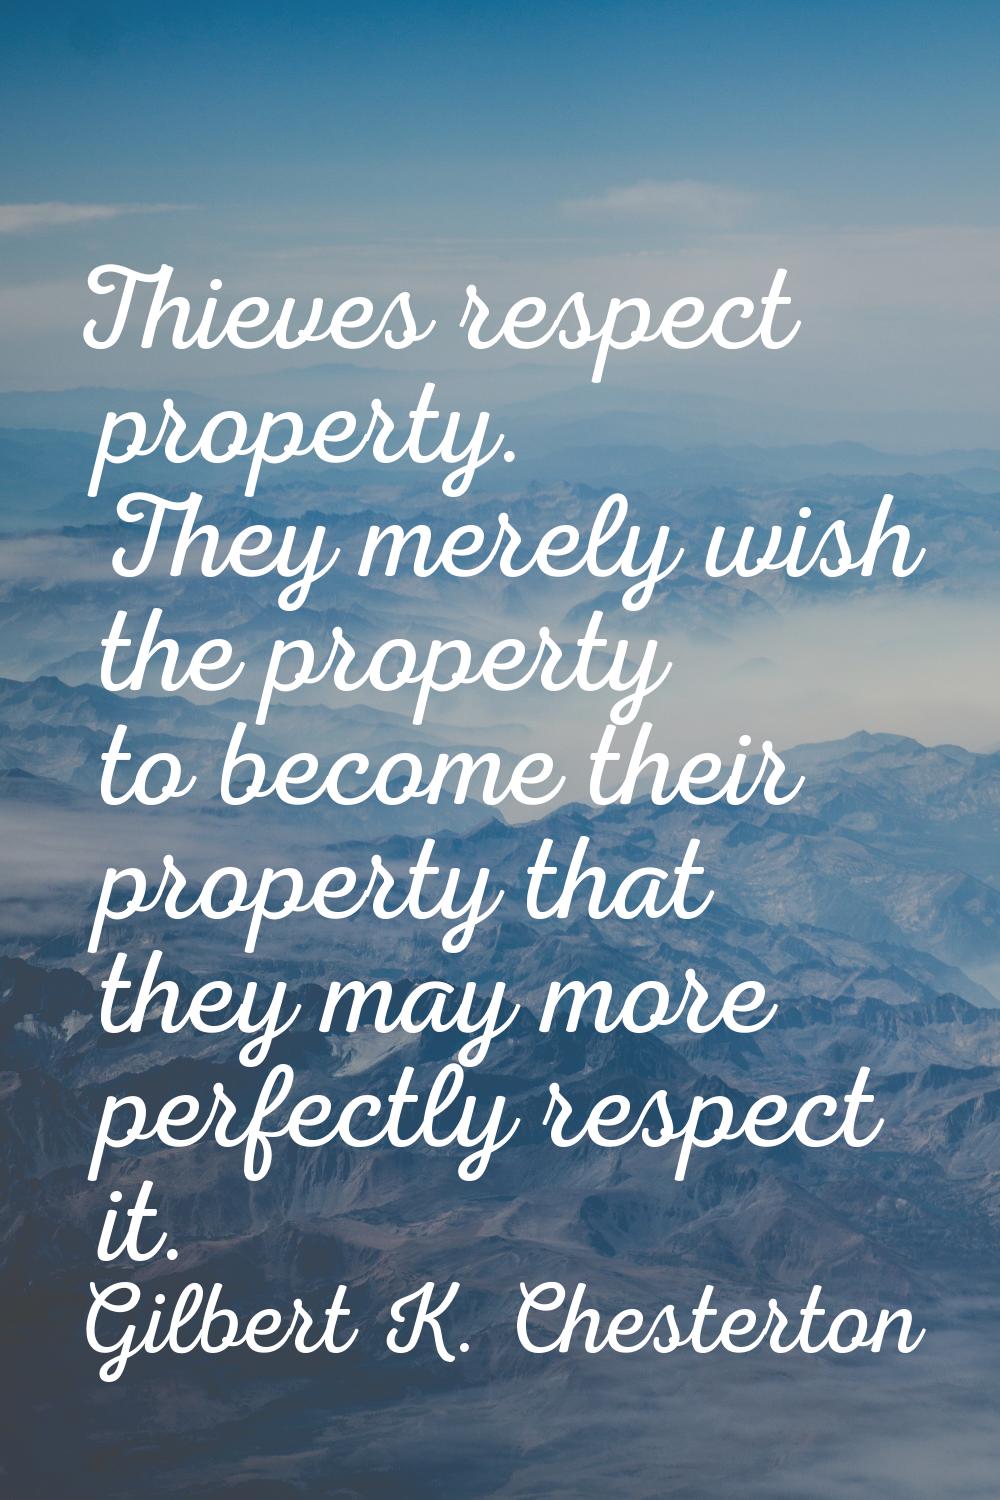 Thieves respect property. They merely wish the property to become their property that they may more